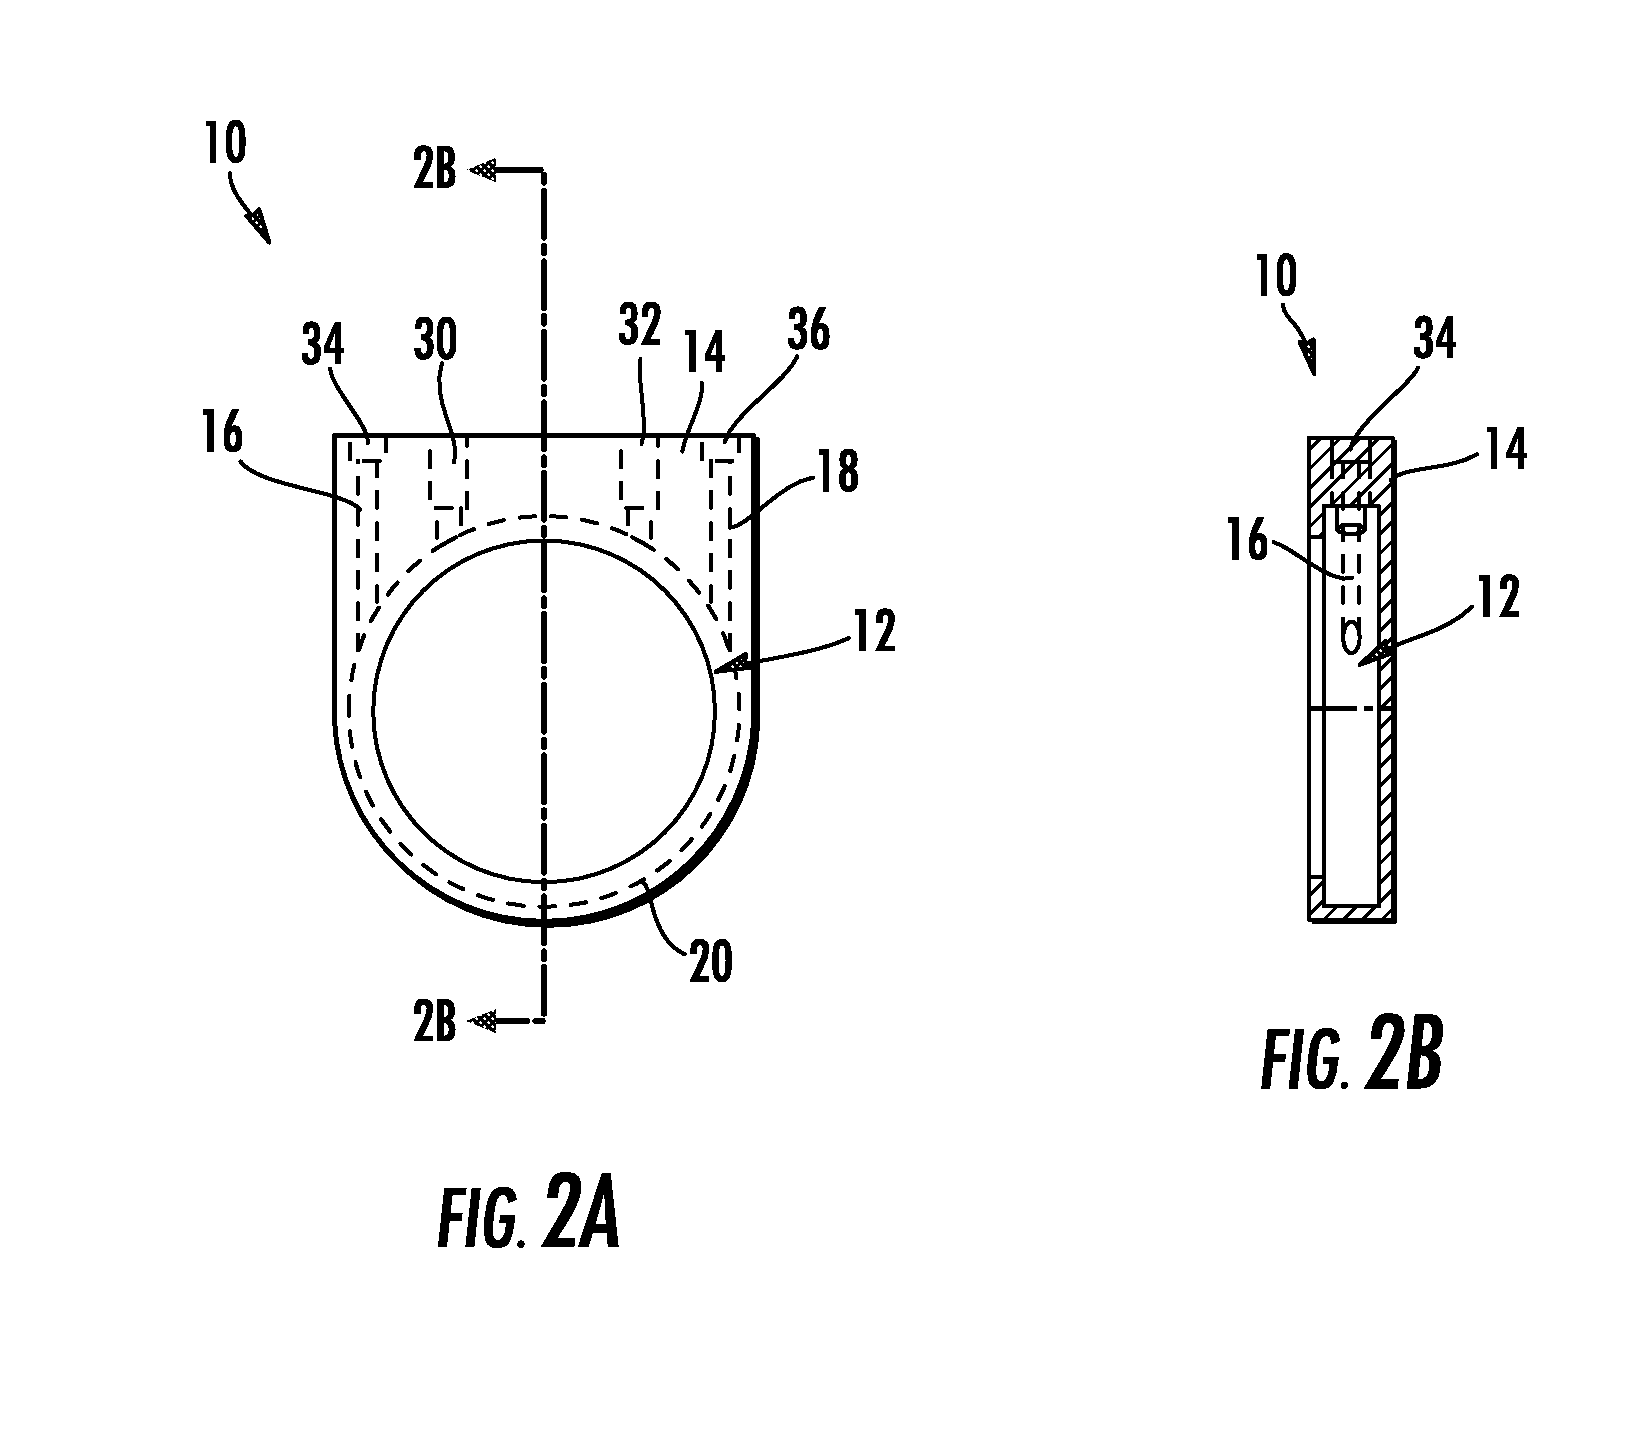 Modular and reconfigurable multi-stage high temperature microreactor cartridge apparatus and system for using same